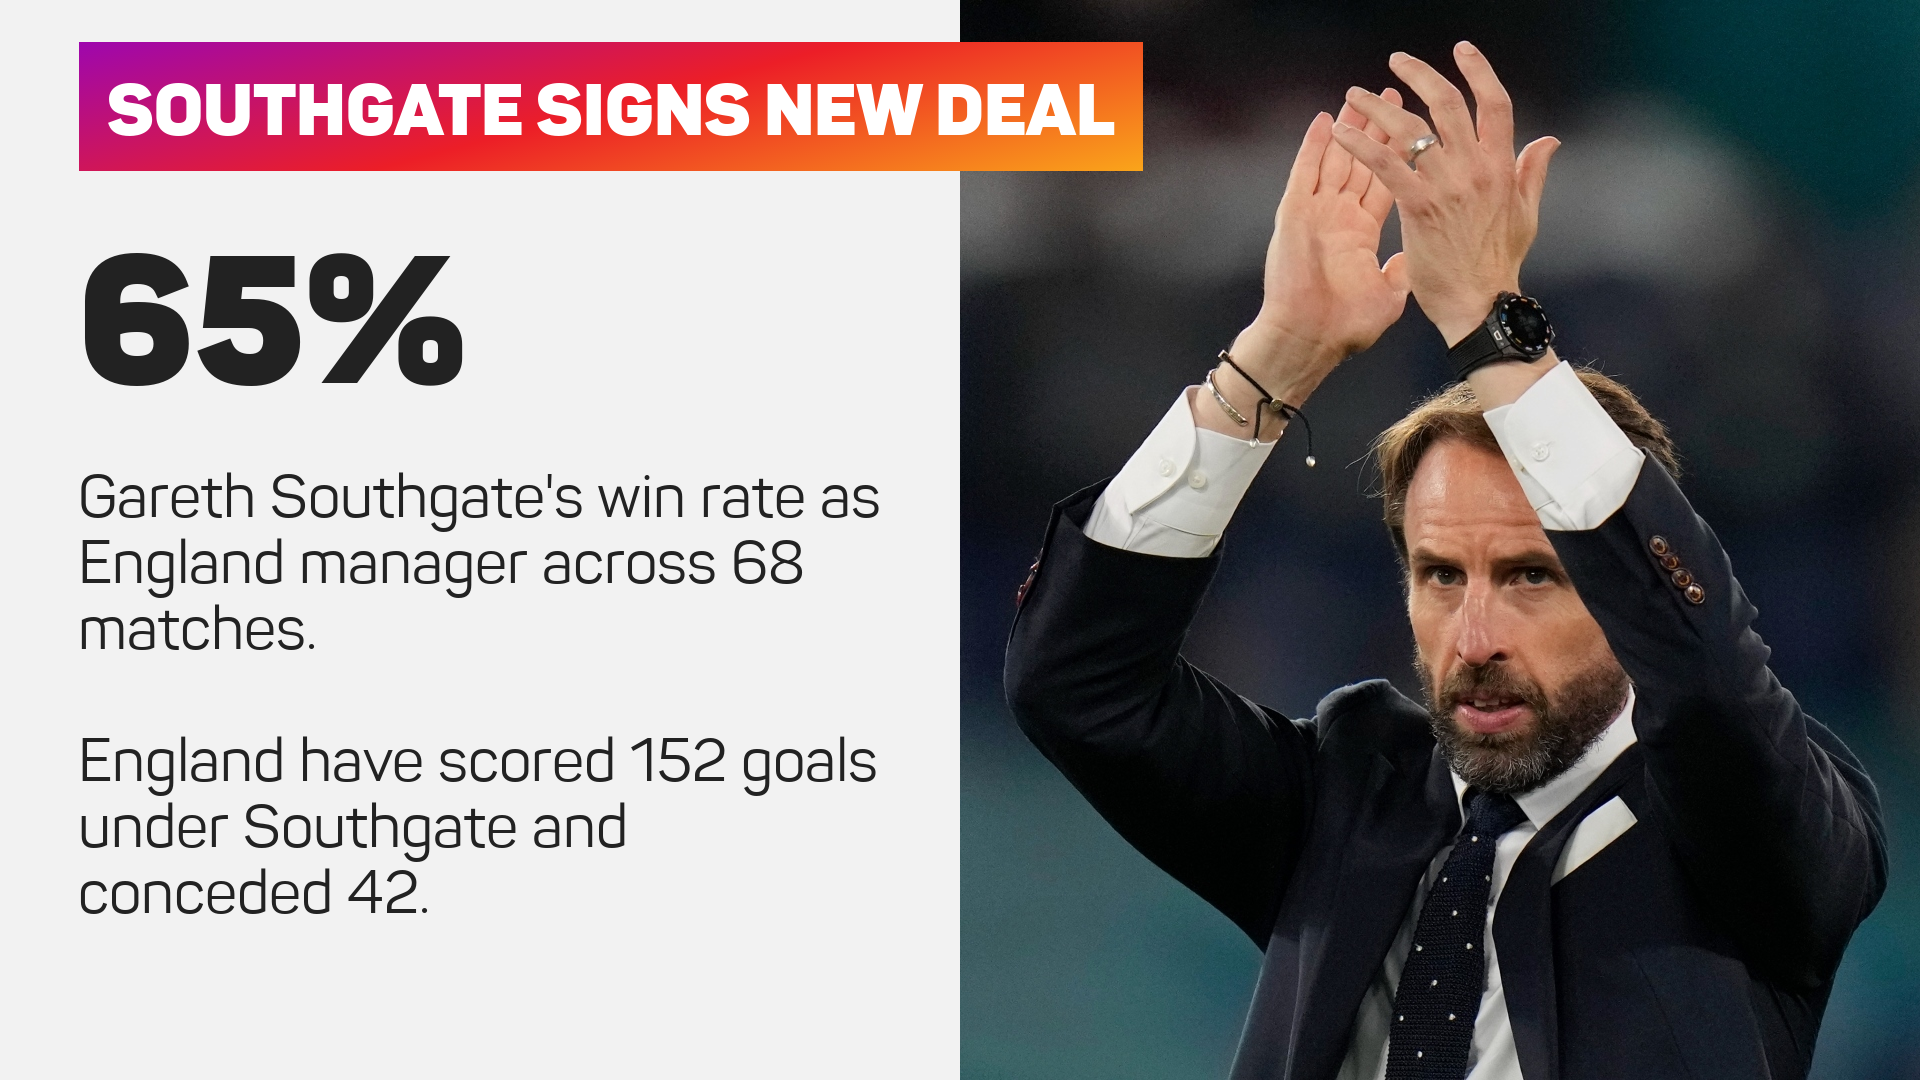 Gareth Southgate has a 65 per cent win rate as England boss